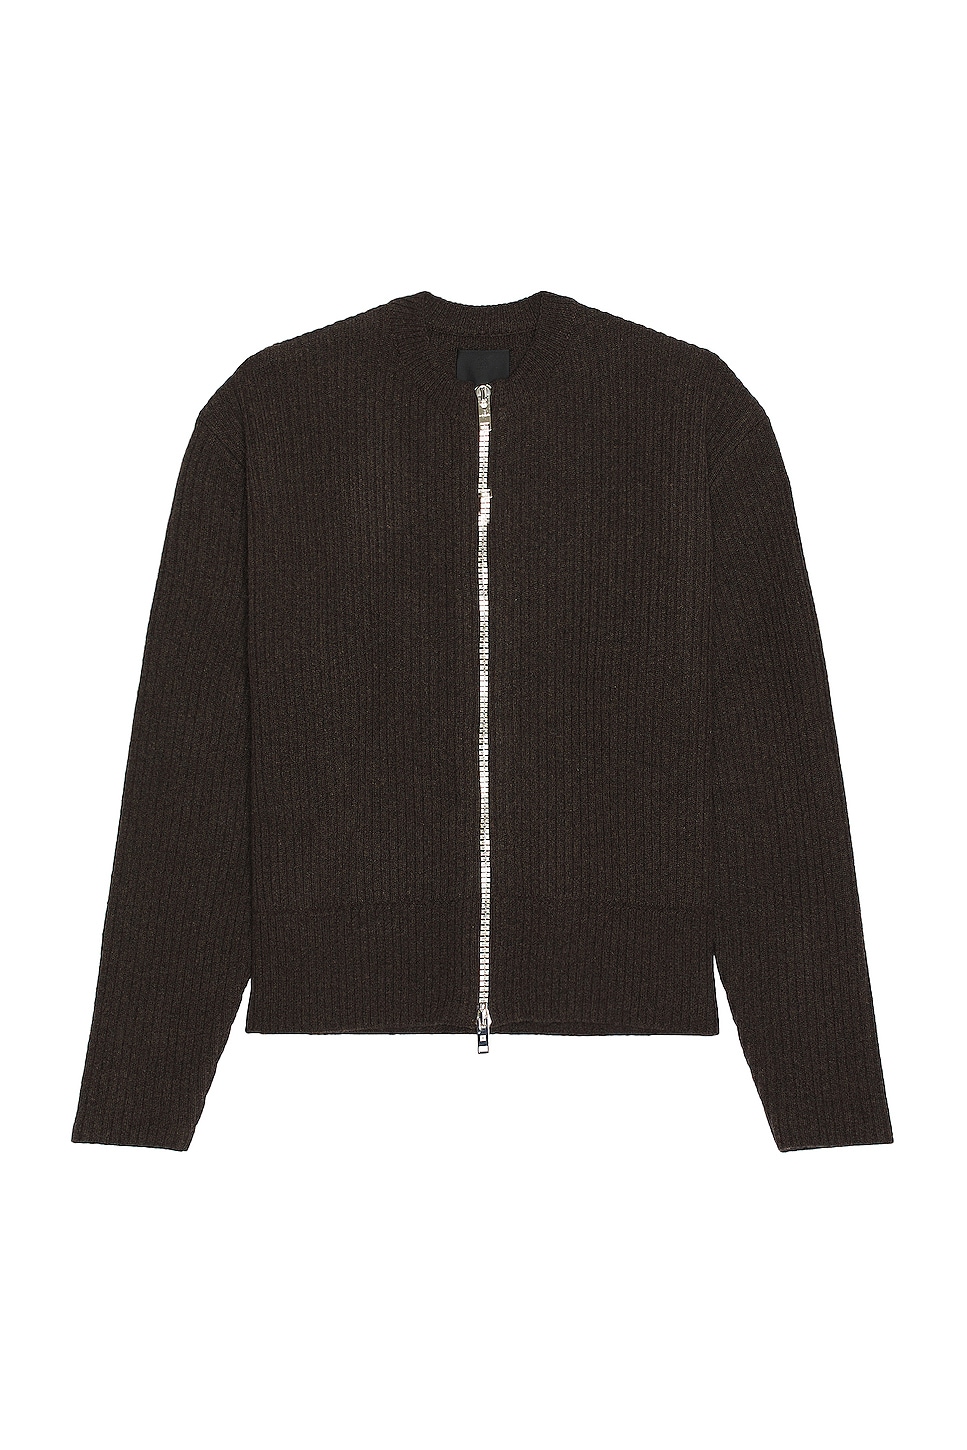 Image 1 of Givenchy Oversized Cardigan in Dark Brown